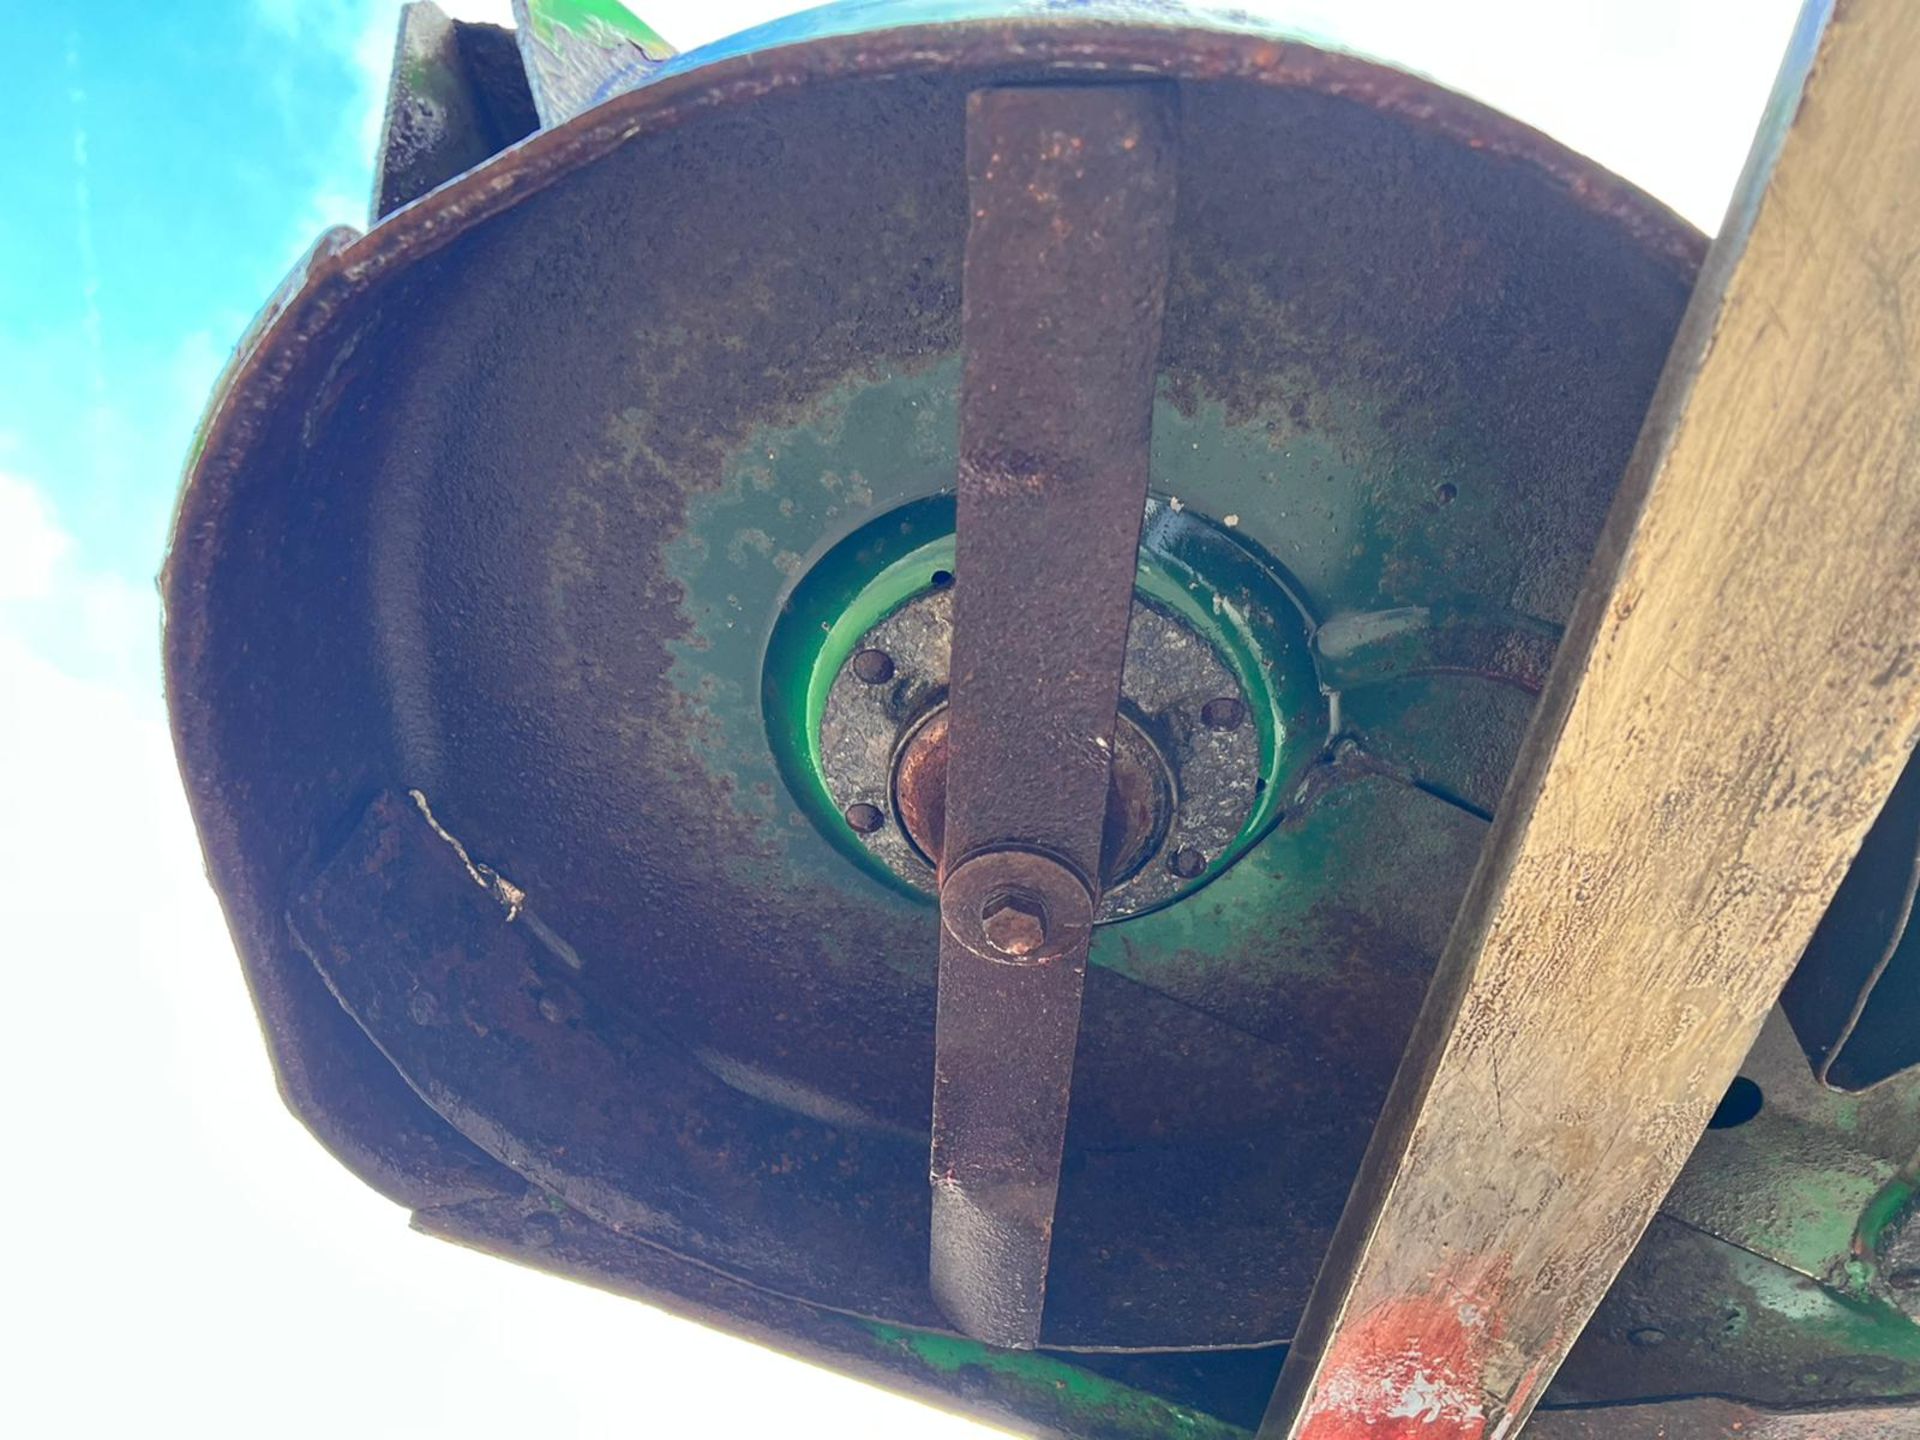 2010 JOHN DEERE 72" MID MOUNTED TRACTOR ROTARY DECK, GOOD SOLID TRIPLE BLADED BECK, WEIGHT 199kg - Image 9 of 12